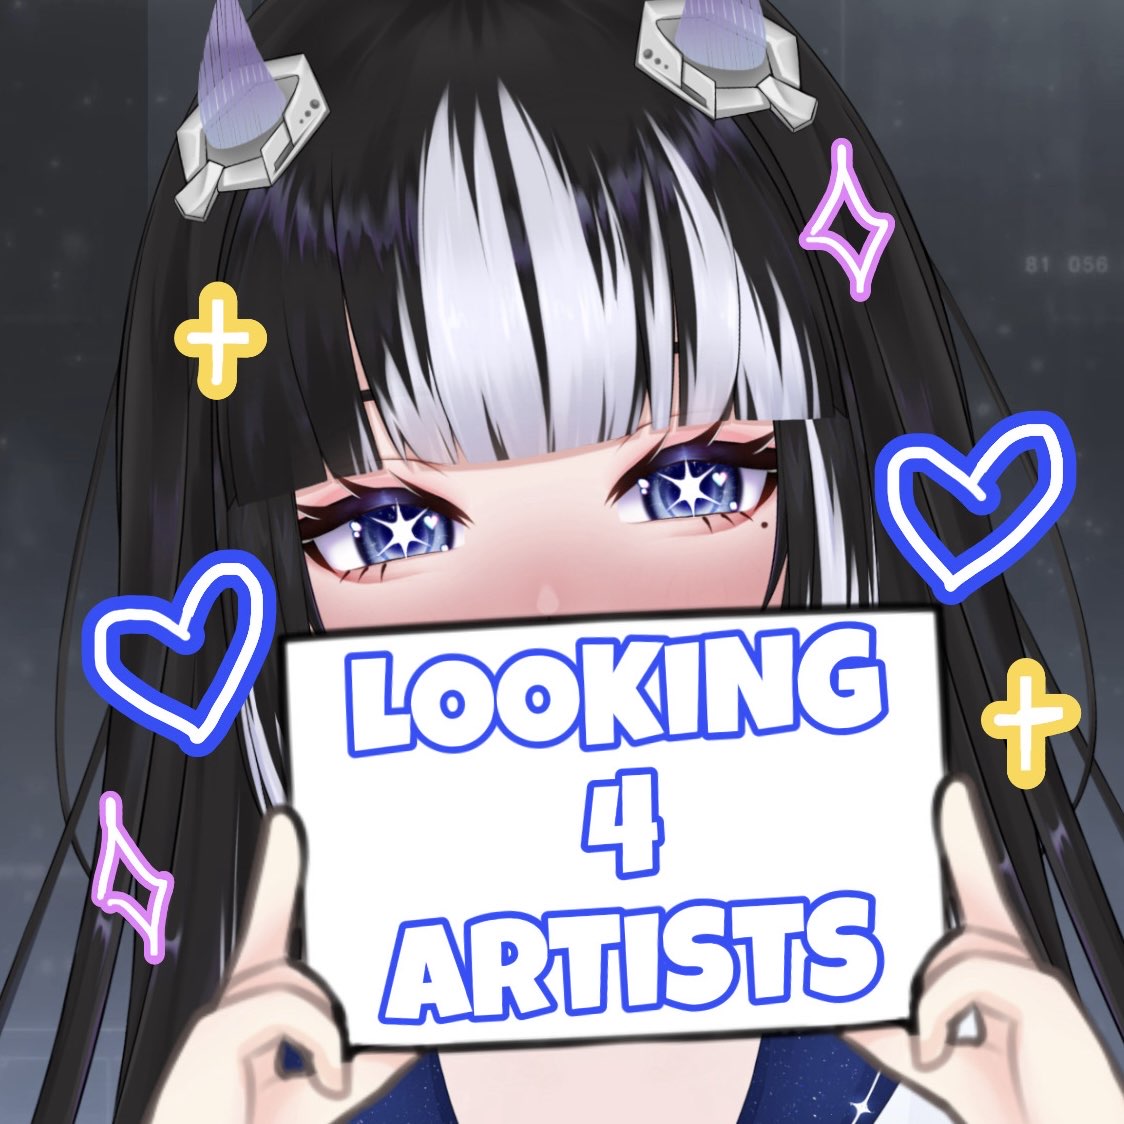 ✨ IM LOOKING FOR ARTIST, TO WORK WITH ✨
⭐️ if you are an artist please comment down below with some of your work!! ⭐️

💙EVERYONE IS WELCOME!💙

#VTUBERSUPPORTCHAIN #envtuber #VTuberEN #Vtuber #VtuberSupport #VtuberUprisings #vtuberart #Twitch #Live2D #artistsupport #PLVtuber